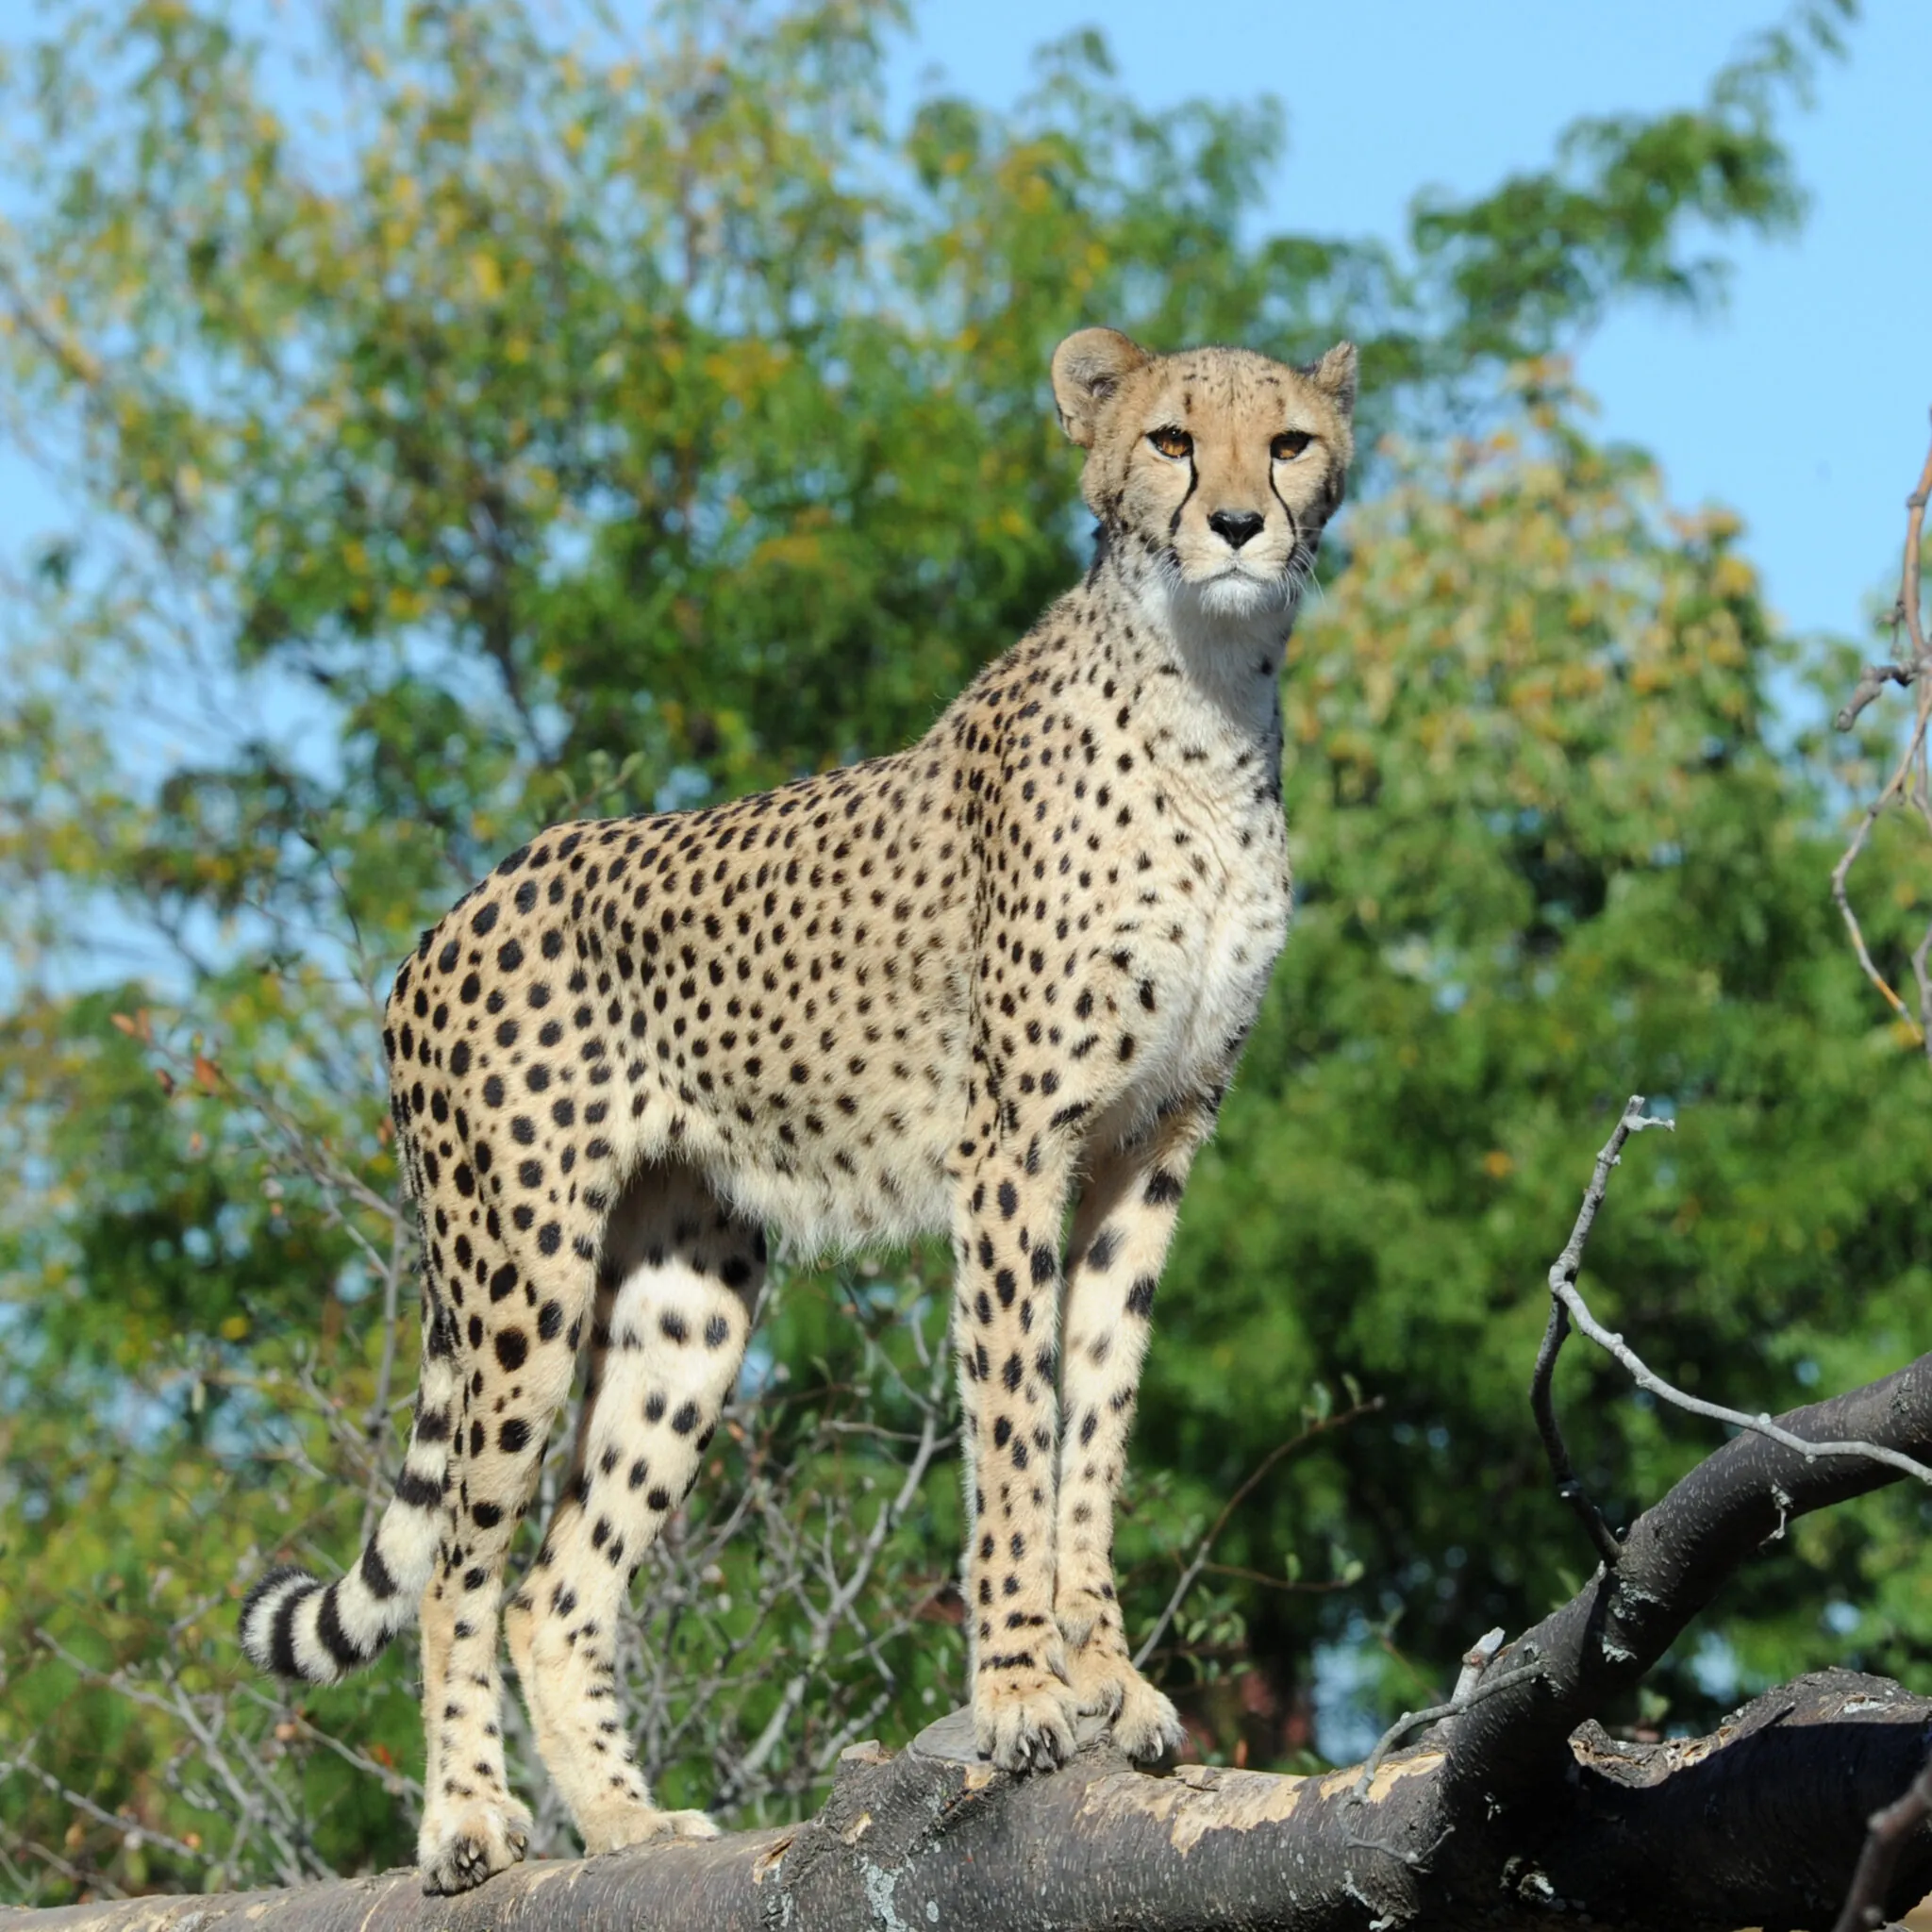 Cheetah stands on a fallen tree. The sky is clear and there are green leaves in the background.